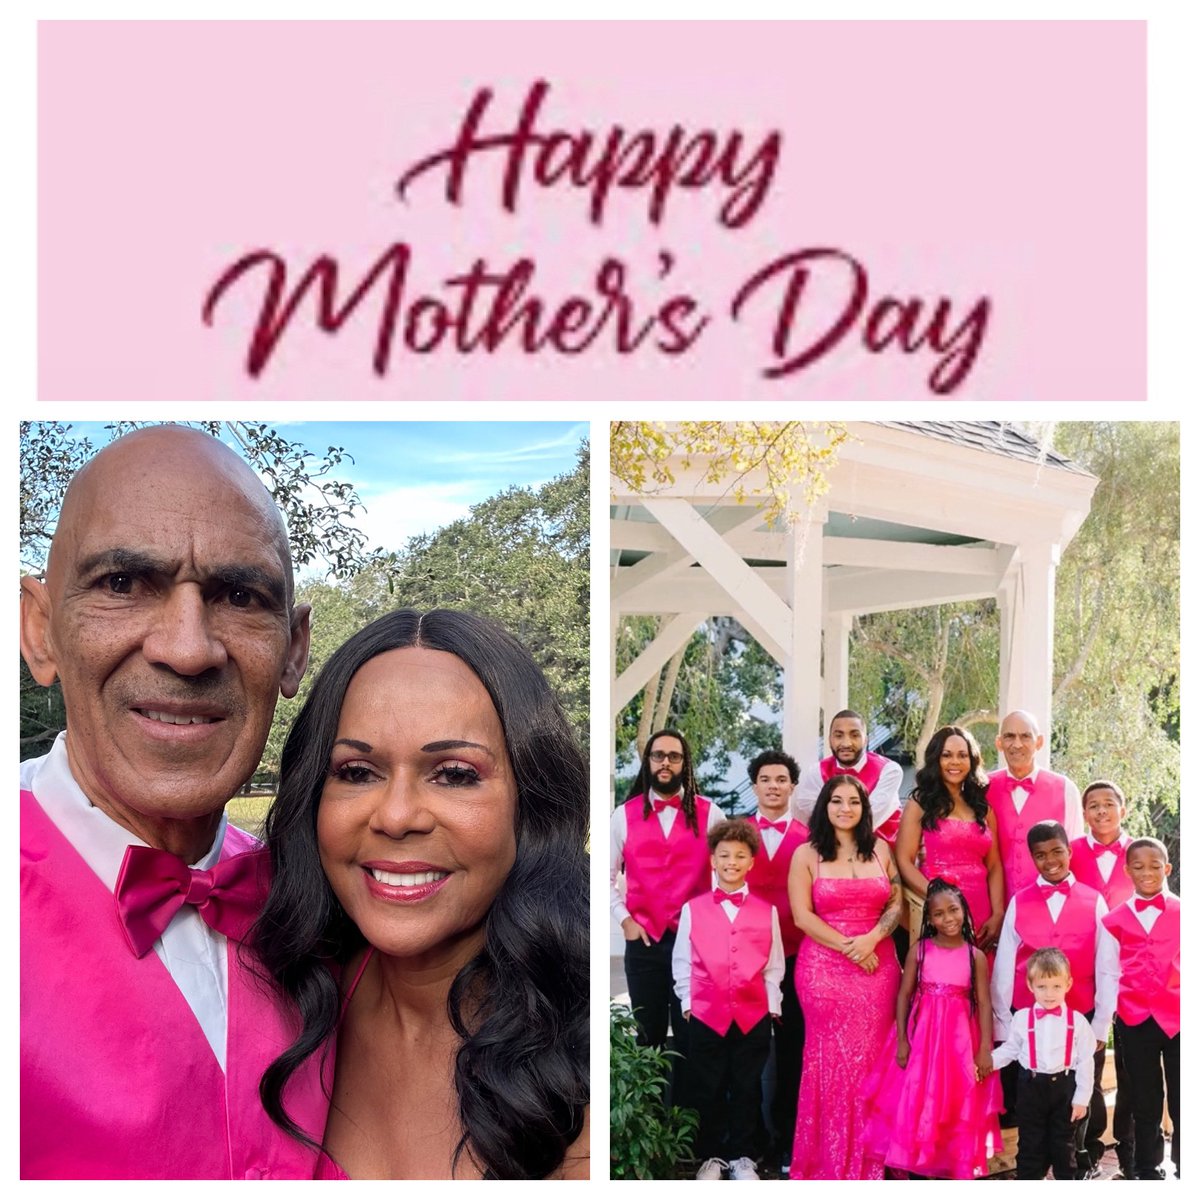 Wishing my beautiful wife Lauren a Happy Mother’s Day. She has been a great mom to all of our kids and we’re going to honor her today with some special things. I hope you remember your mothers  and bless them today as well. 🙏🏽❤️